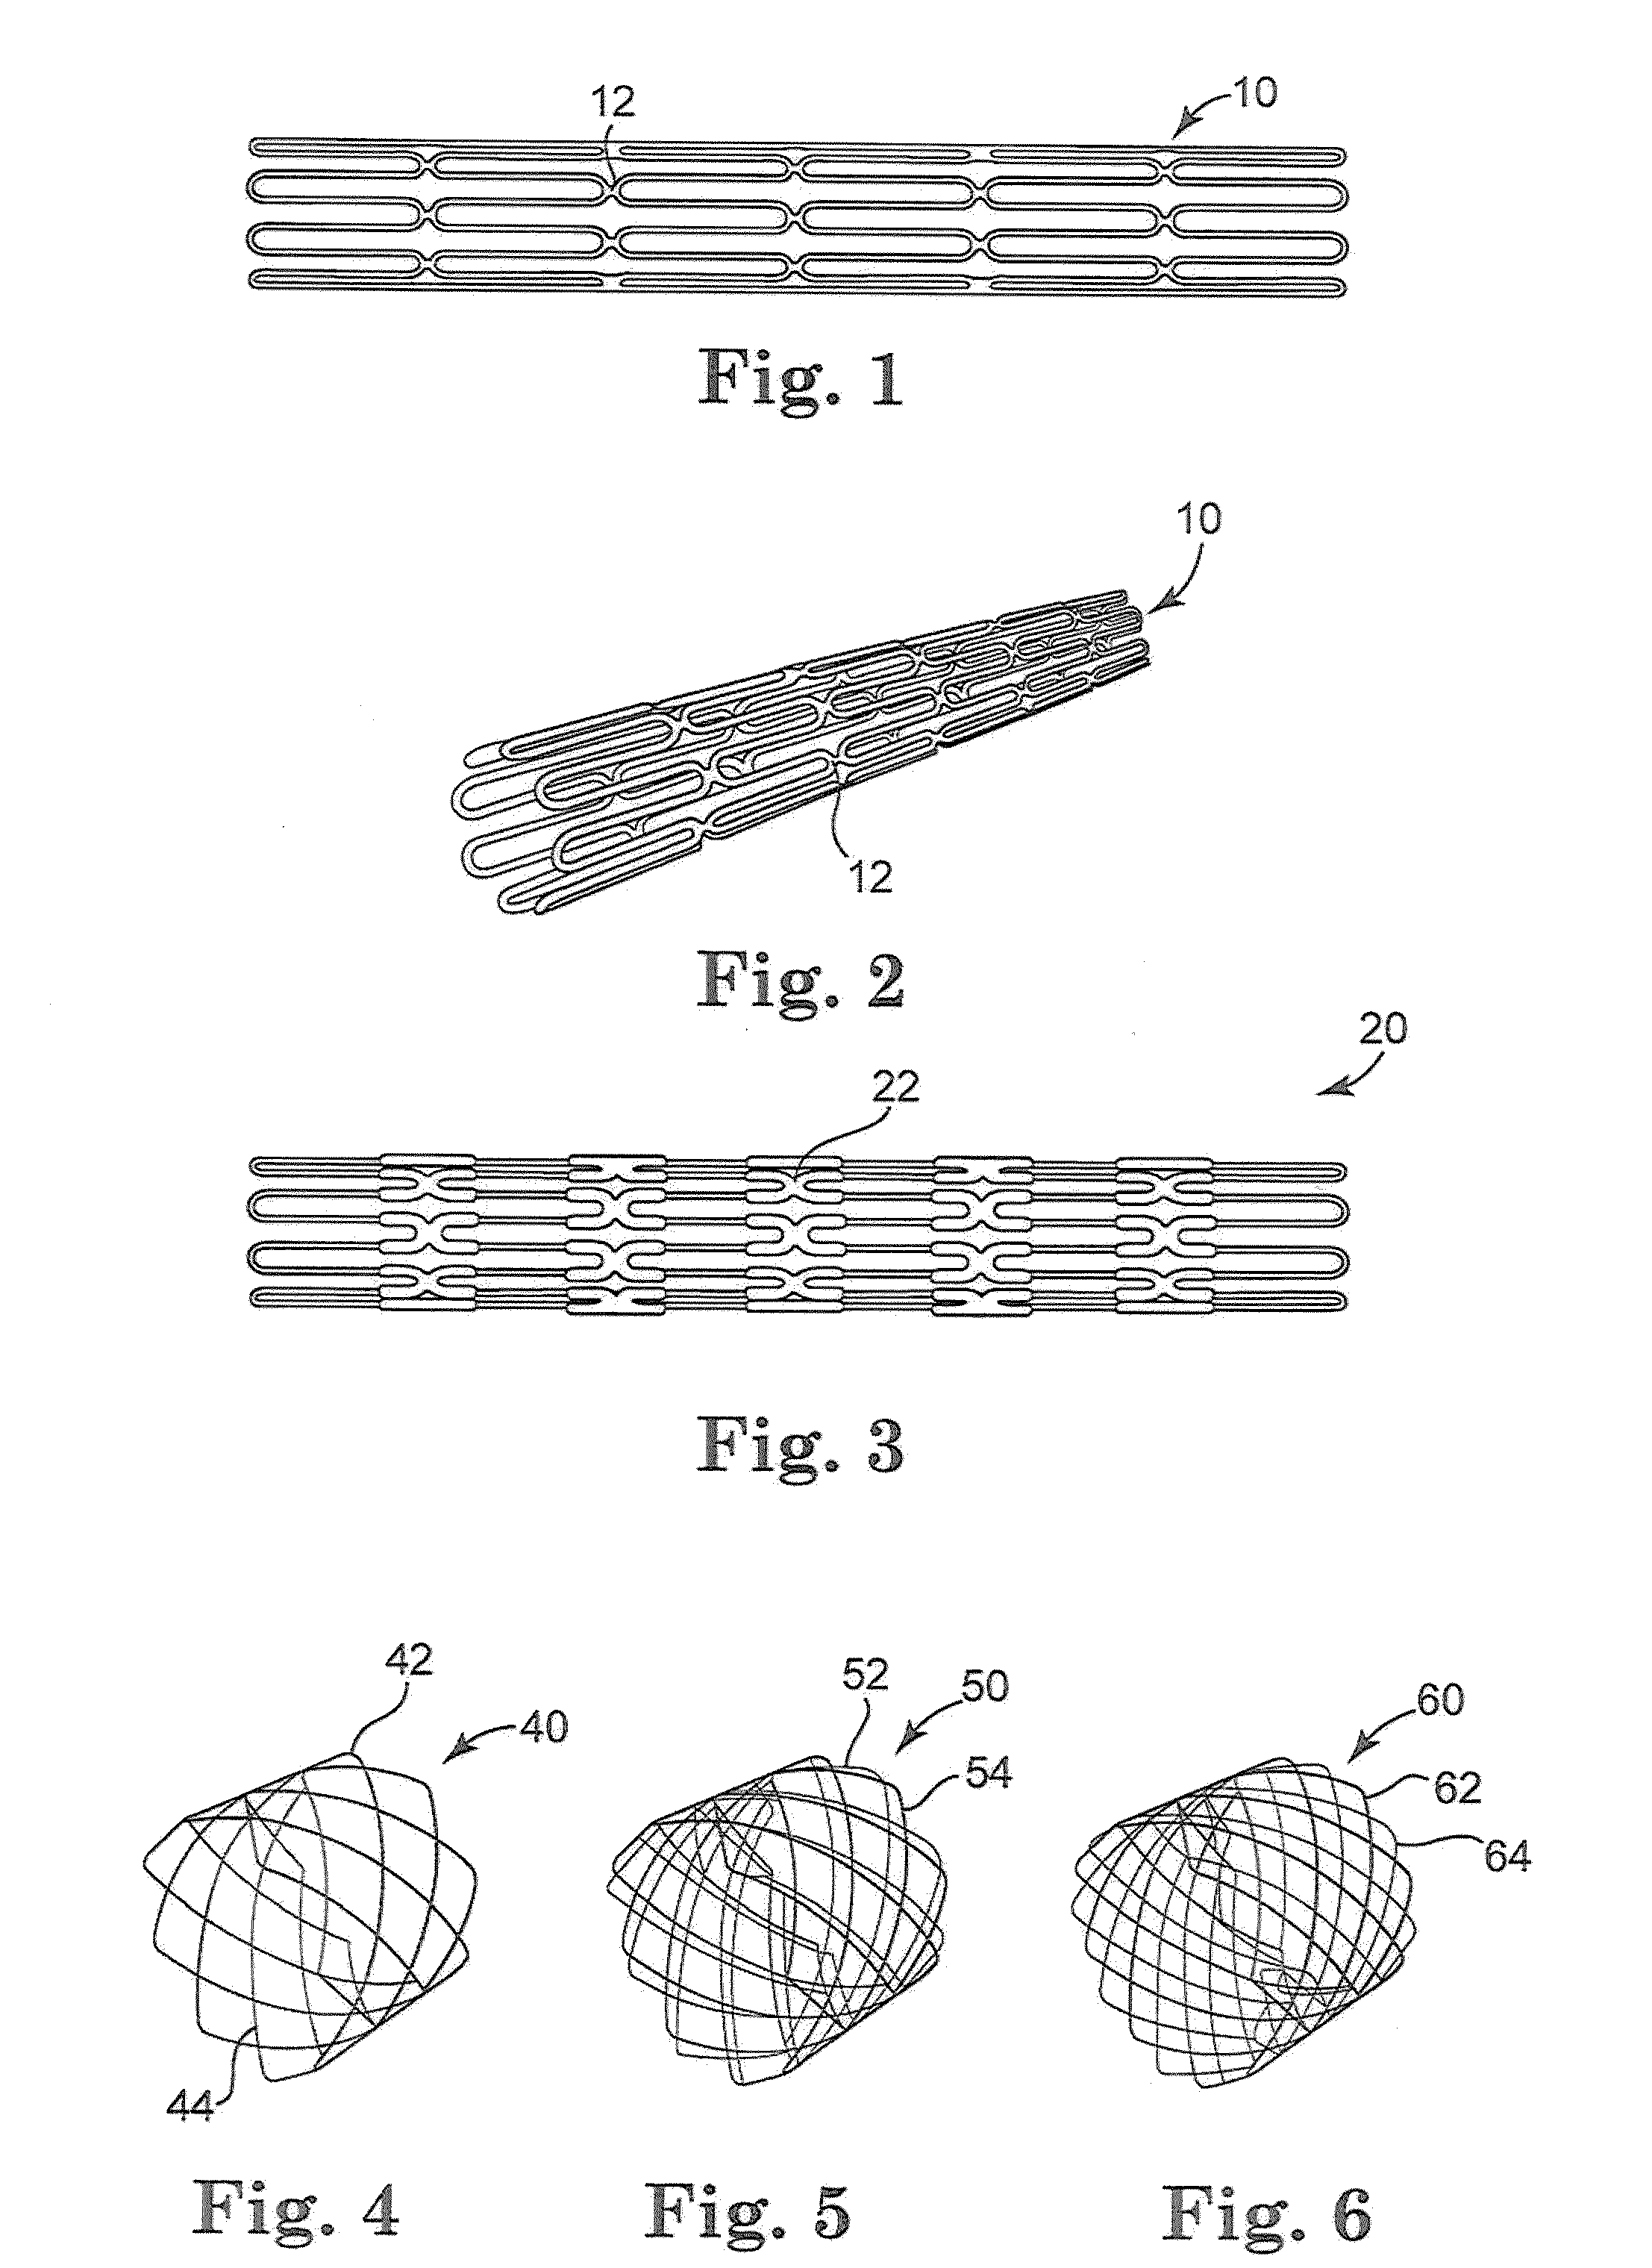 Multi-layered stents and methods of implanting